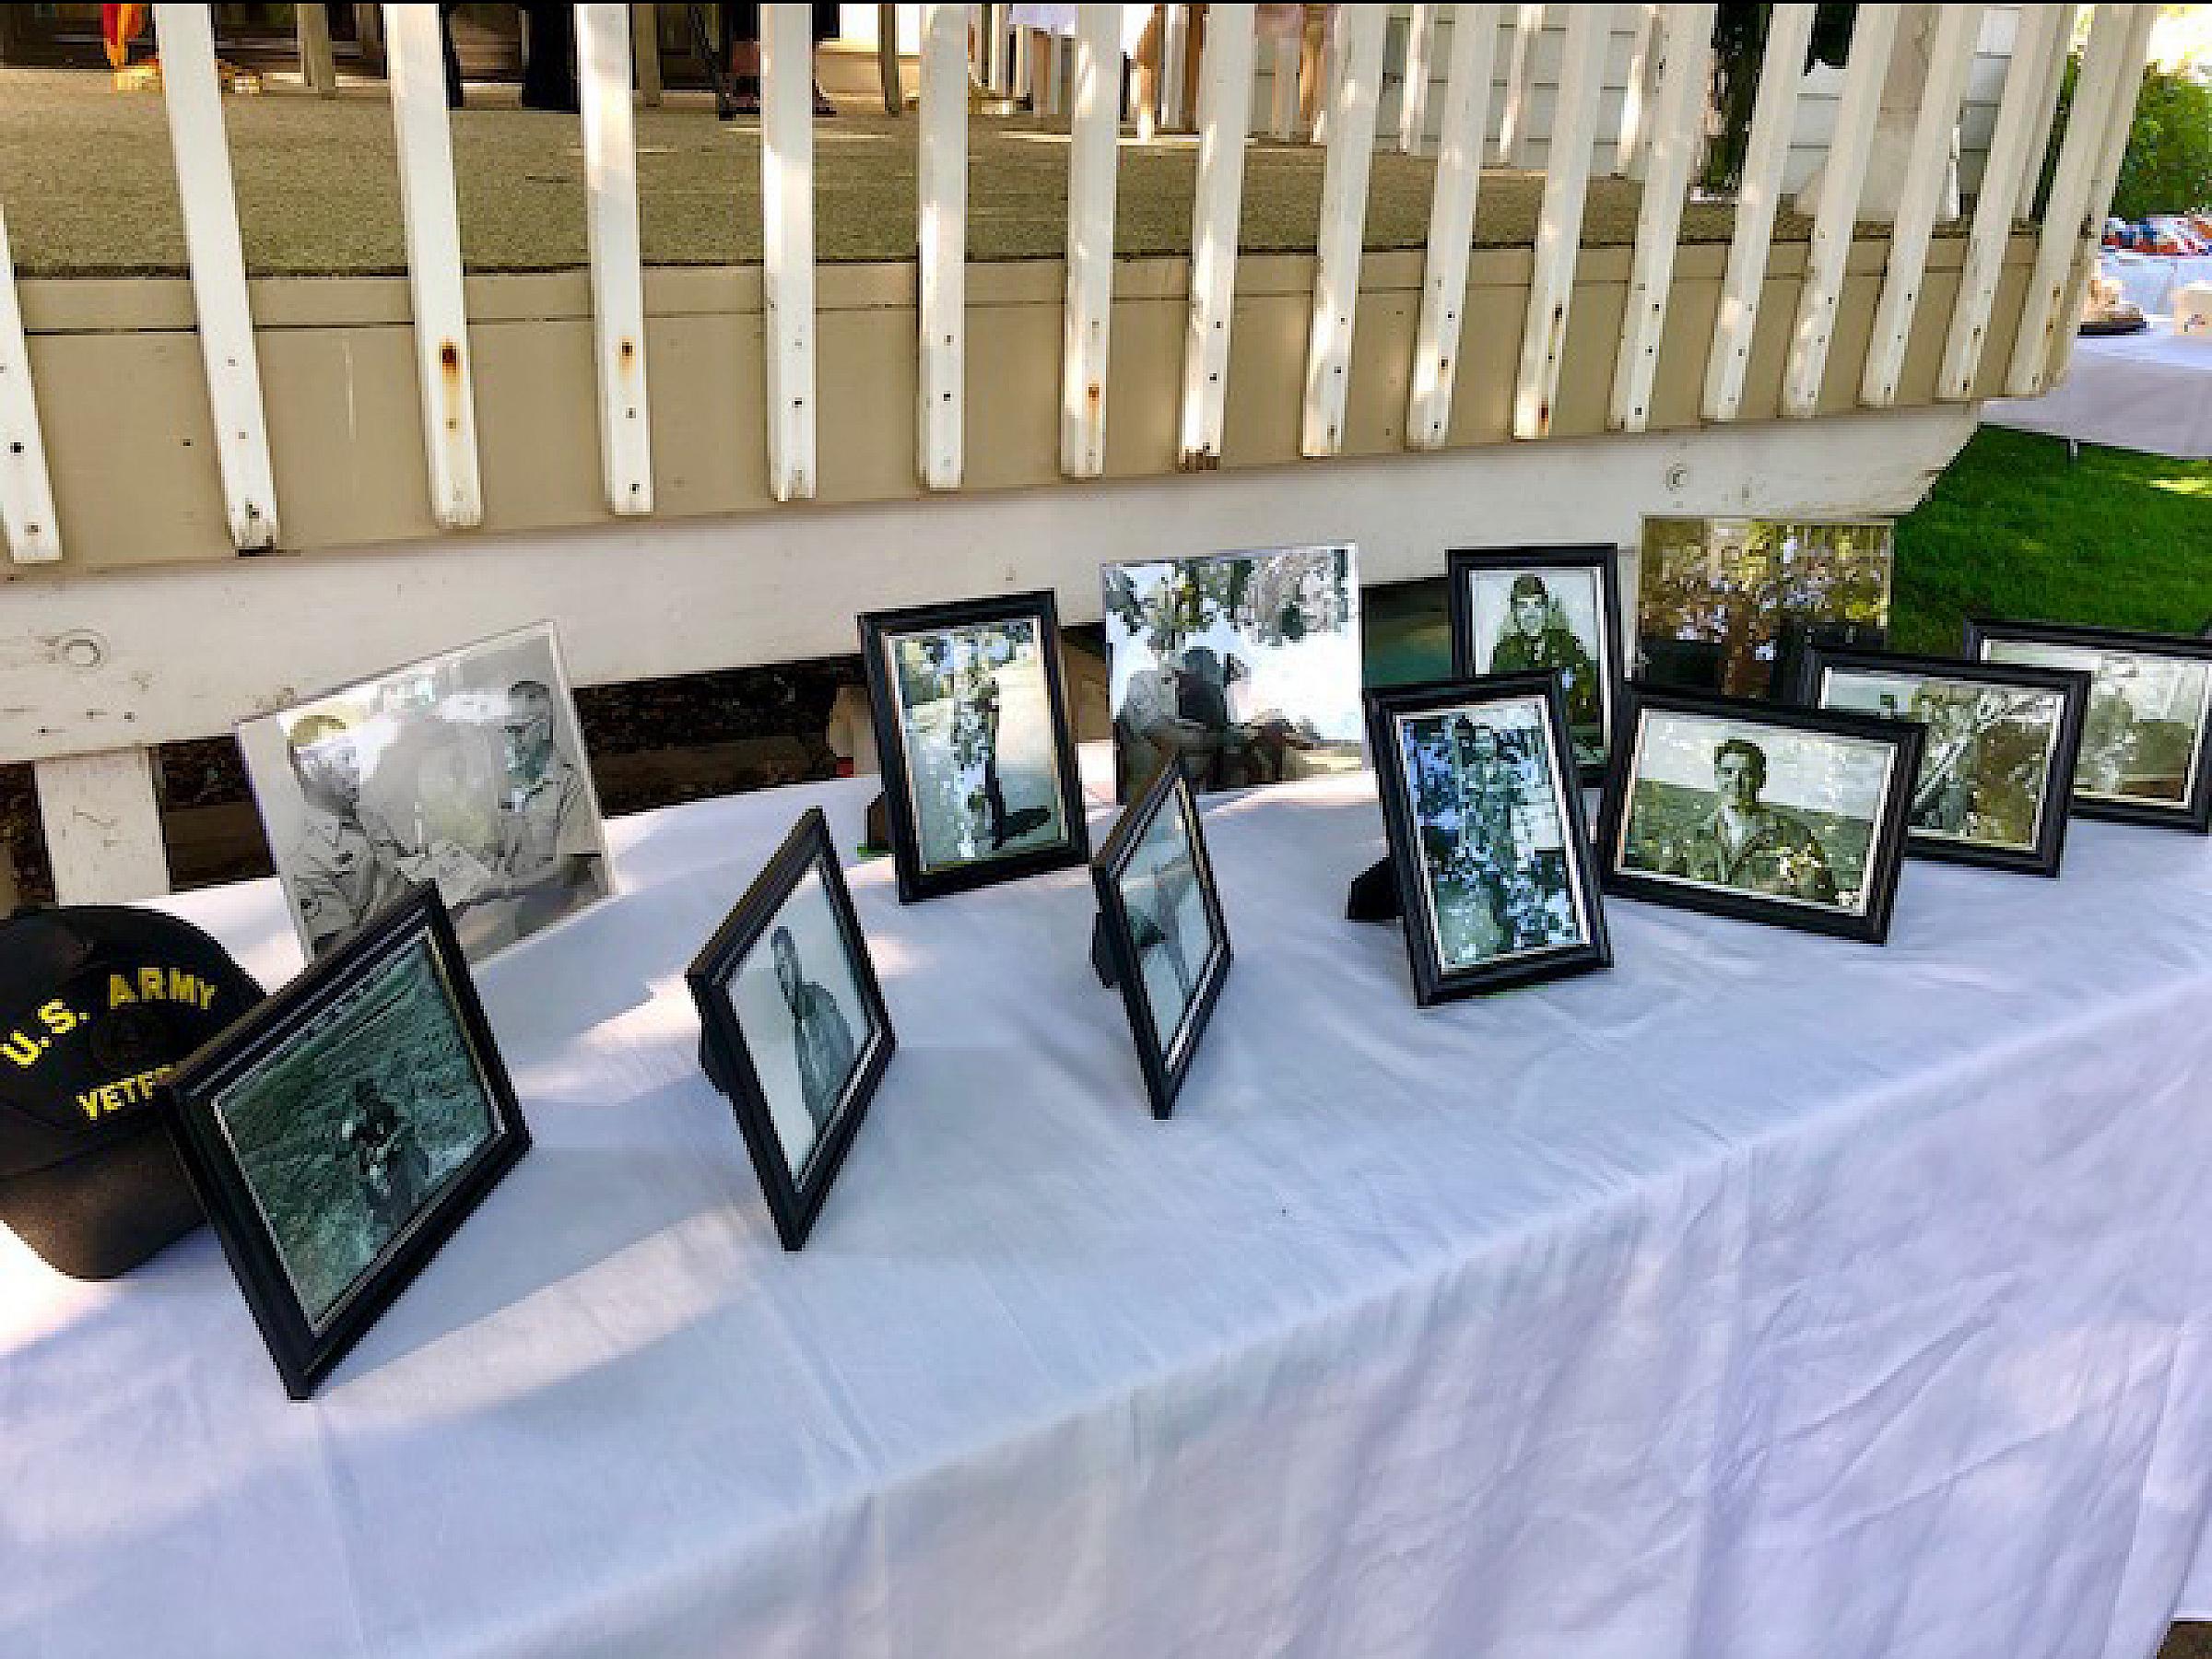 Framed photos of service men on table